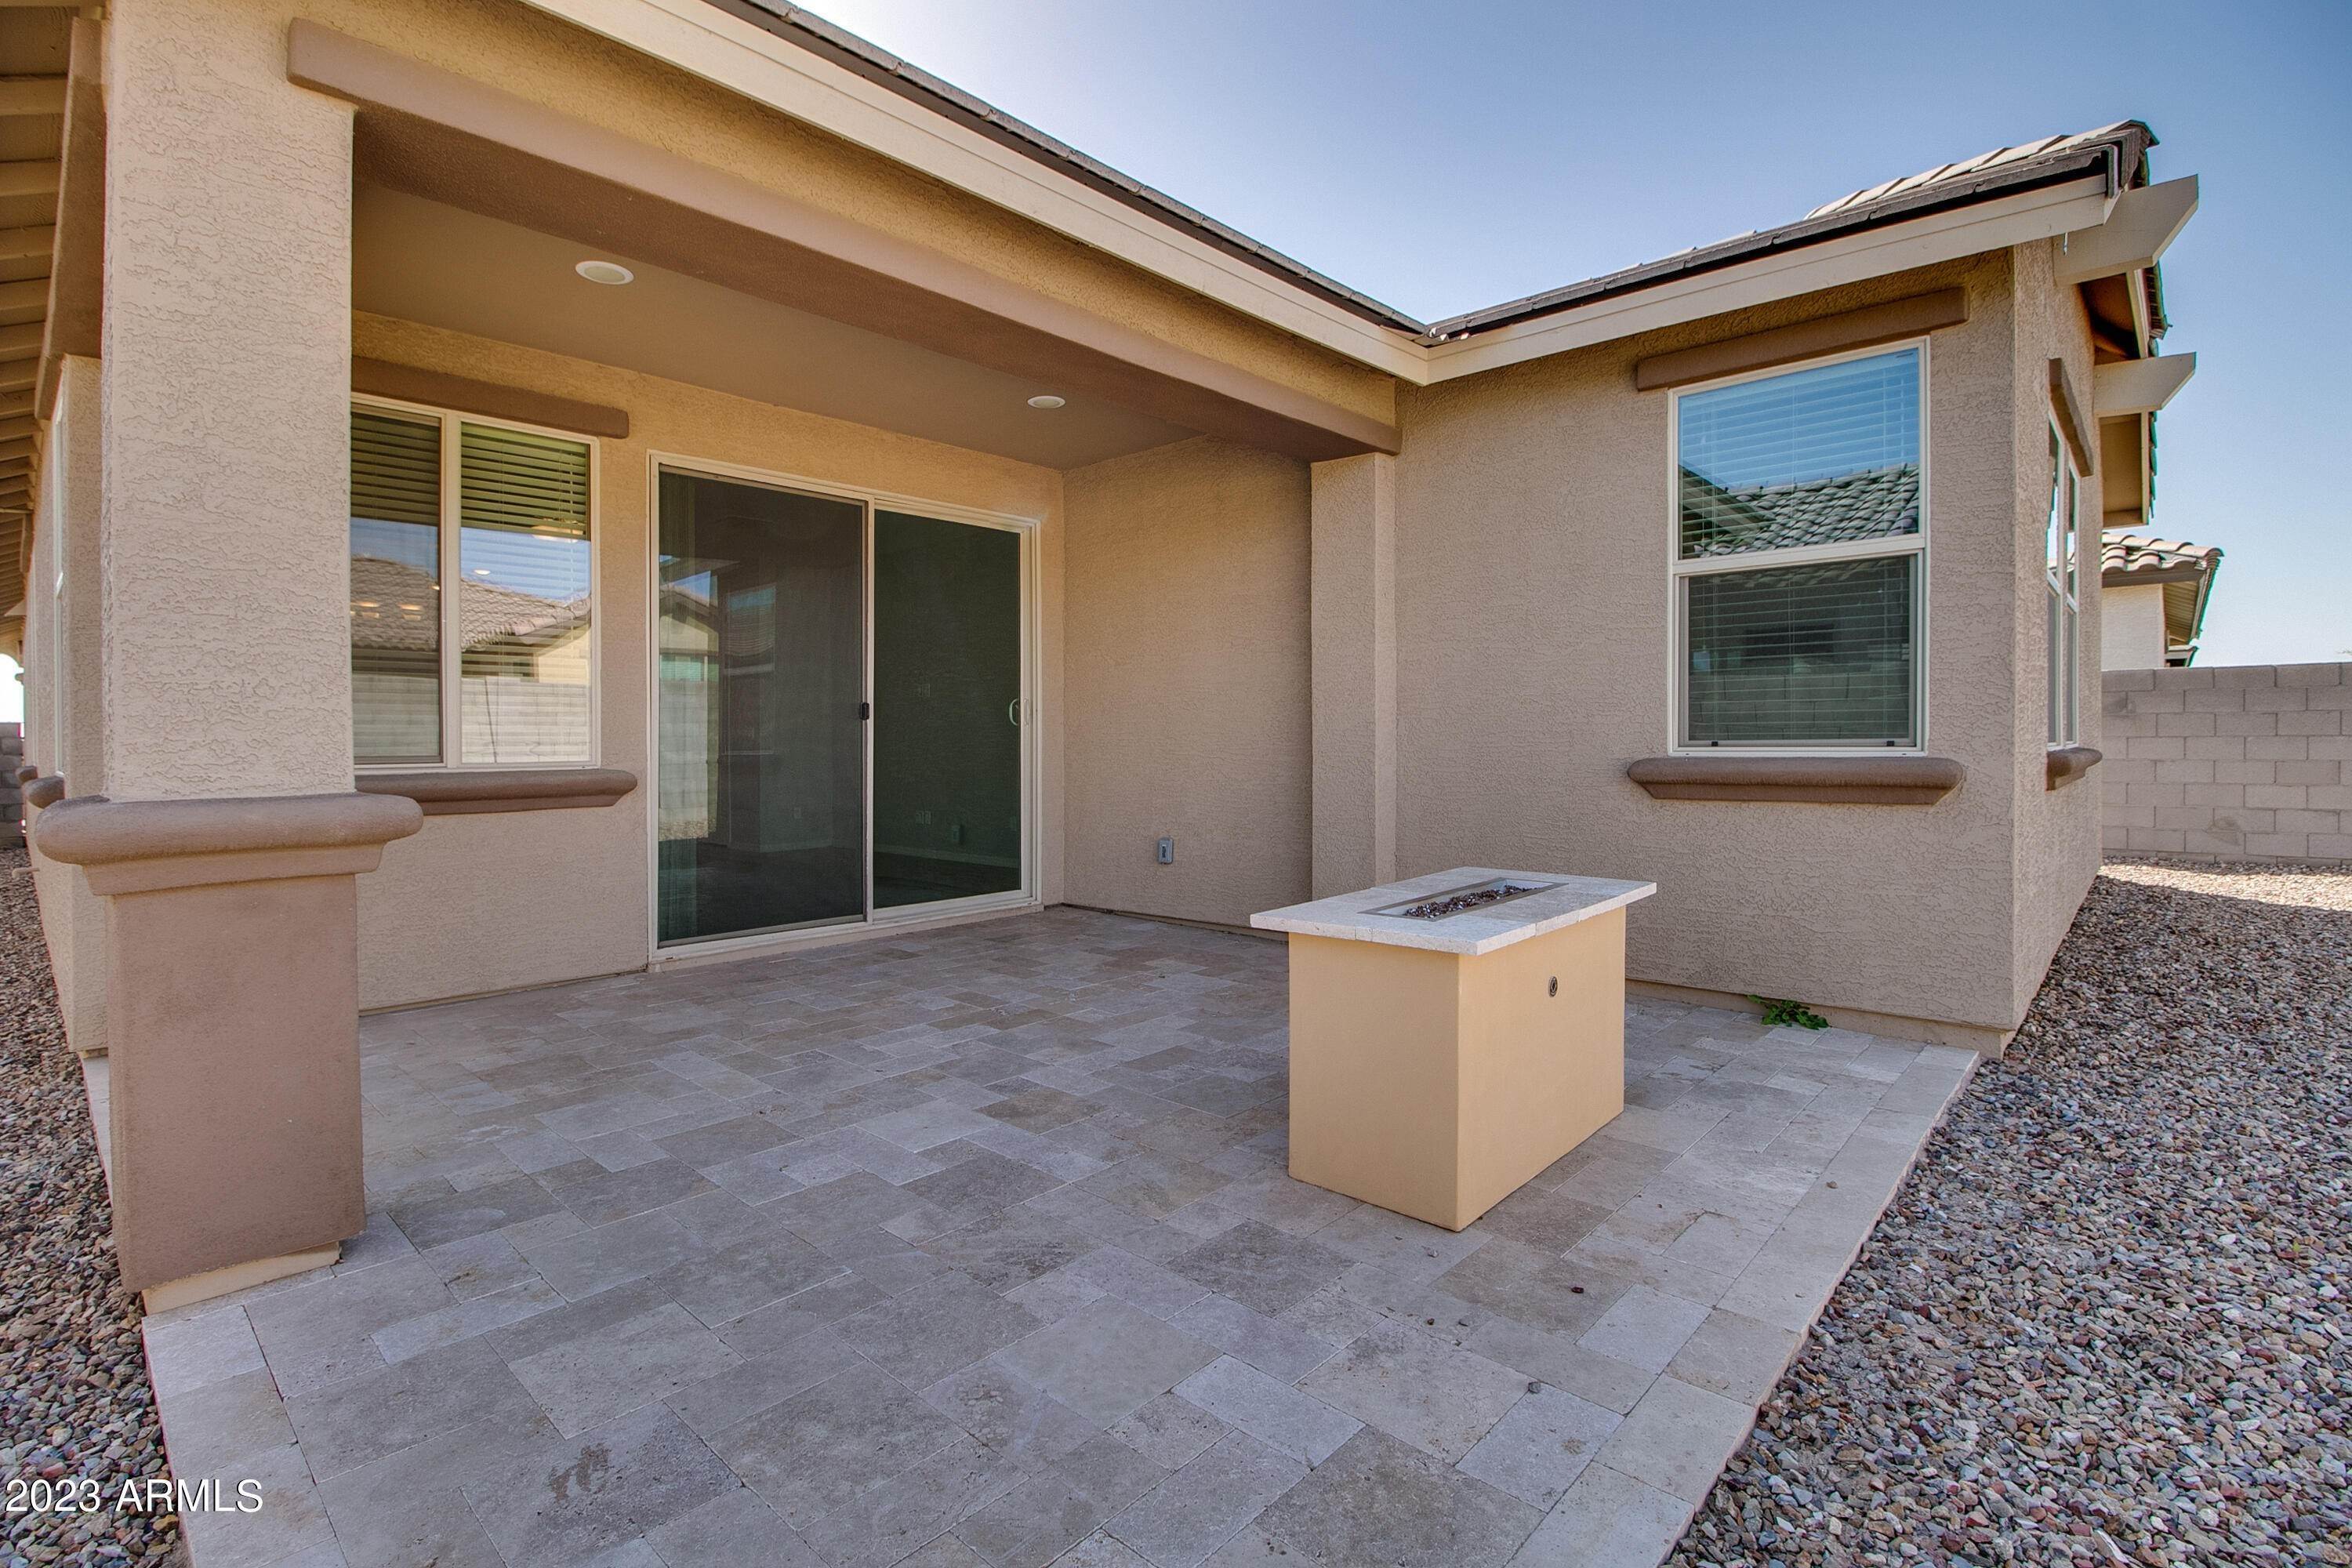 30. Single Family for Sale at Goodyear, AZ 85338